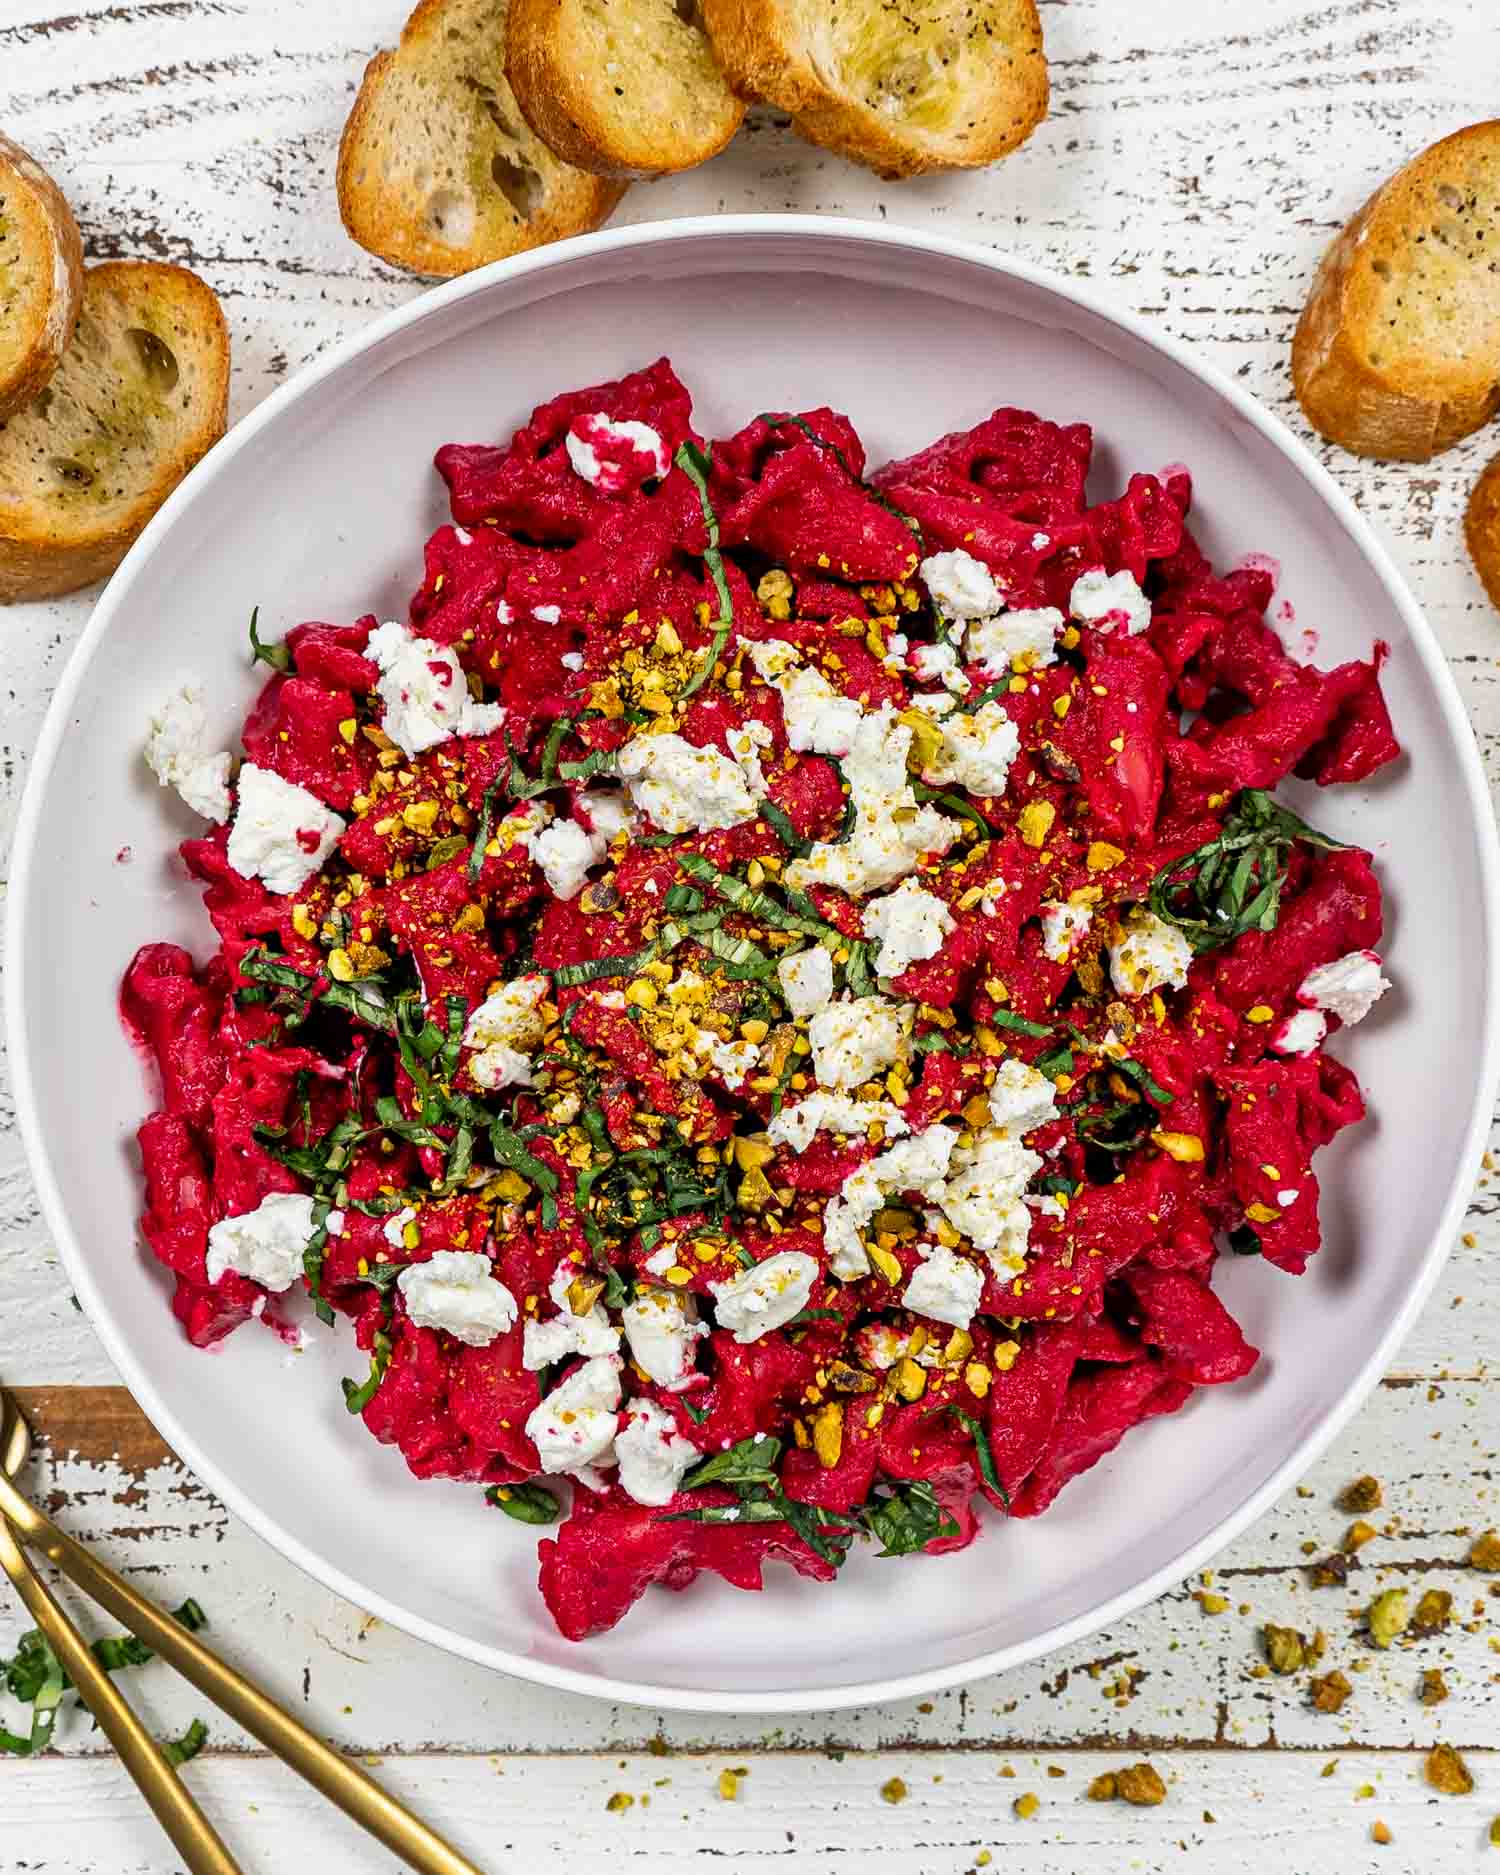 beets and goat cheese pasta on a white plate garnished with goat cheese, basil and pistachios.